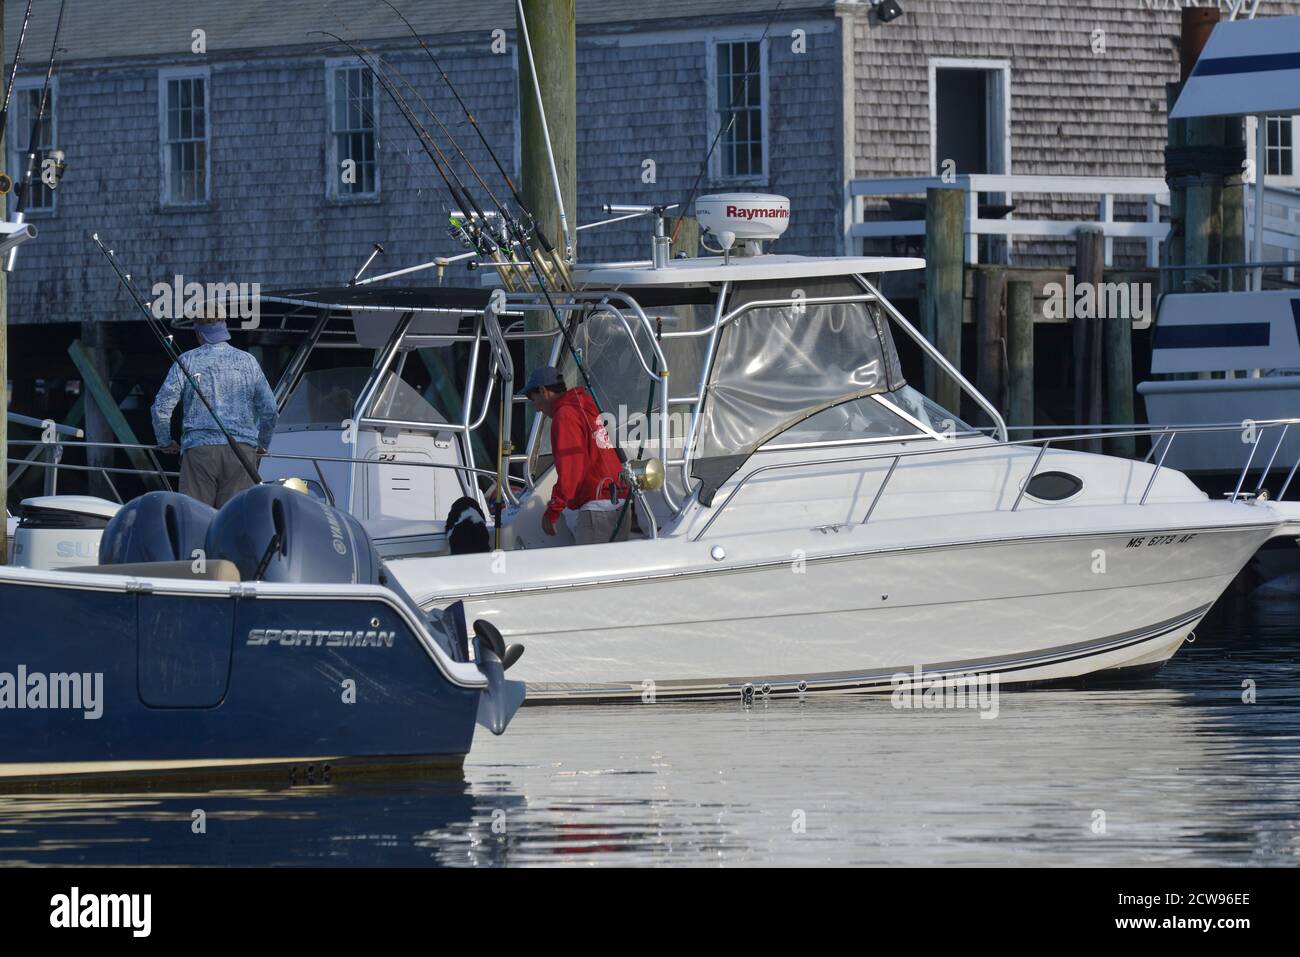 Barnstable, Massachusetts, USA. 25th Sep, 2020. Boaters prepare for a day on the water at Barnstable Harbor on Cape Cod in the early Autumn. Credit: Kenneth Martin/ZUMA Wire/Alamy Live News Stock Photo